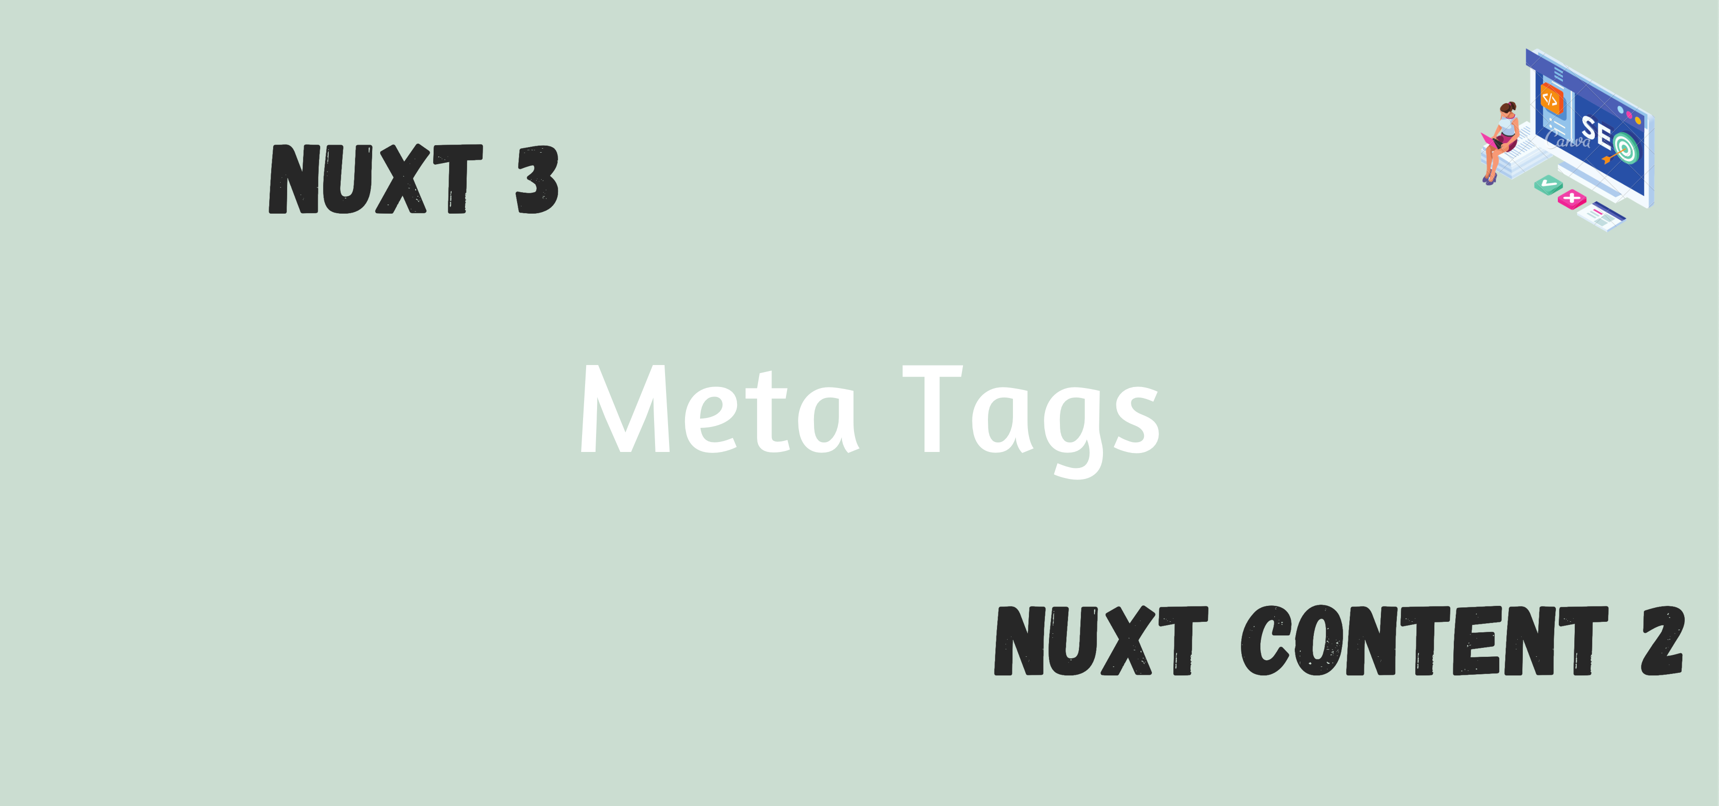 Adding Meta tags in Nuxt 3 and Nuxt Content 2